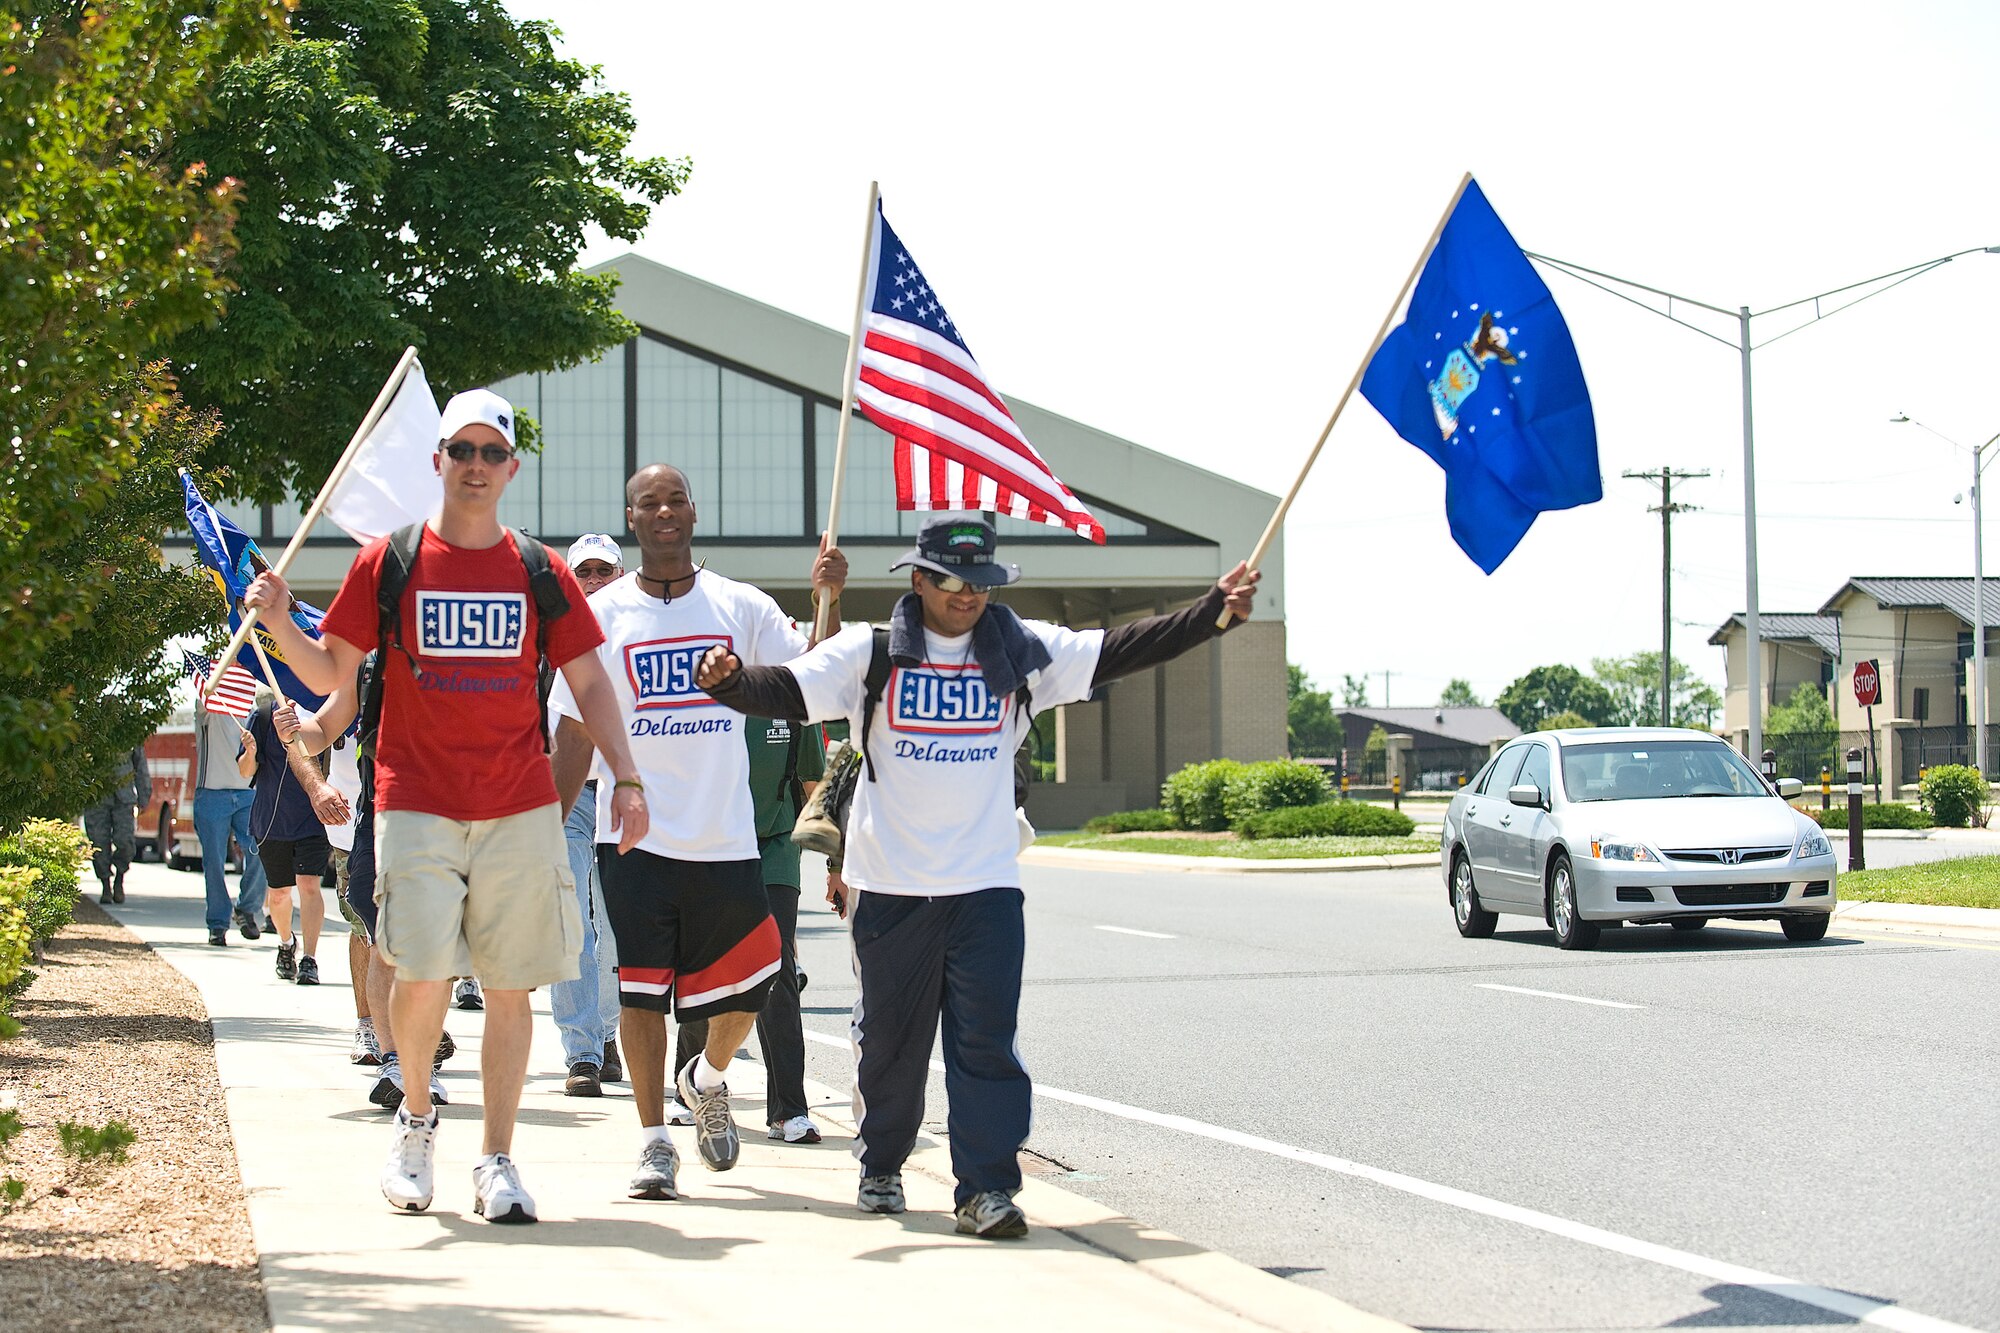 Particpants in the 2010 USO Base 2 Base march walk toward the 436th Airlift Wing Headquarters on Dover Air Force Base, Del., May 21, 2010. The March is a 47-mile journey that starts at Delaware Air National Guard Headquarters and ends at Dover AFB. (U.S. Air Force photo/Roland Balik)